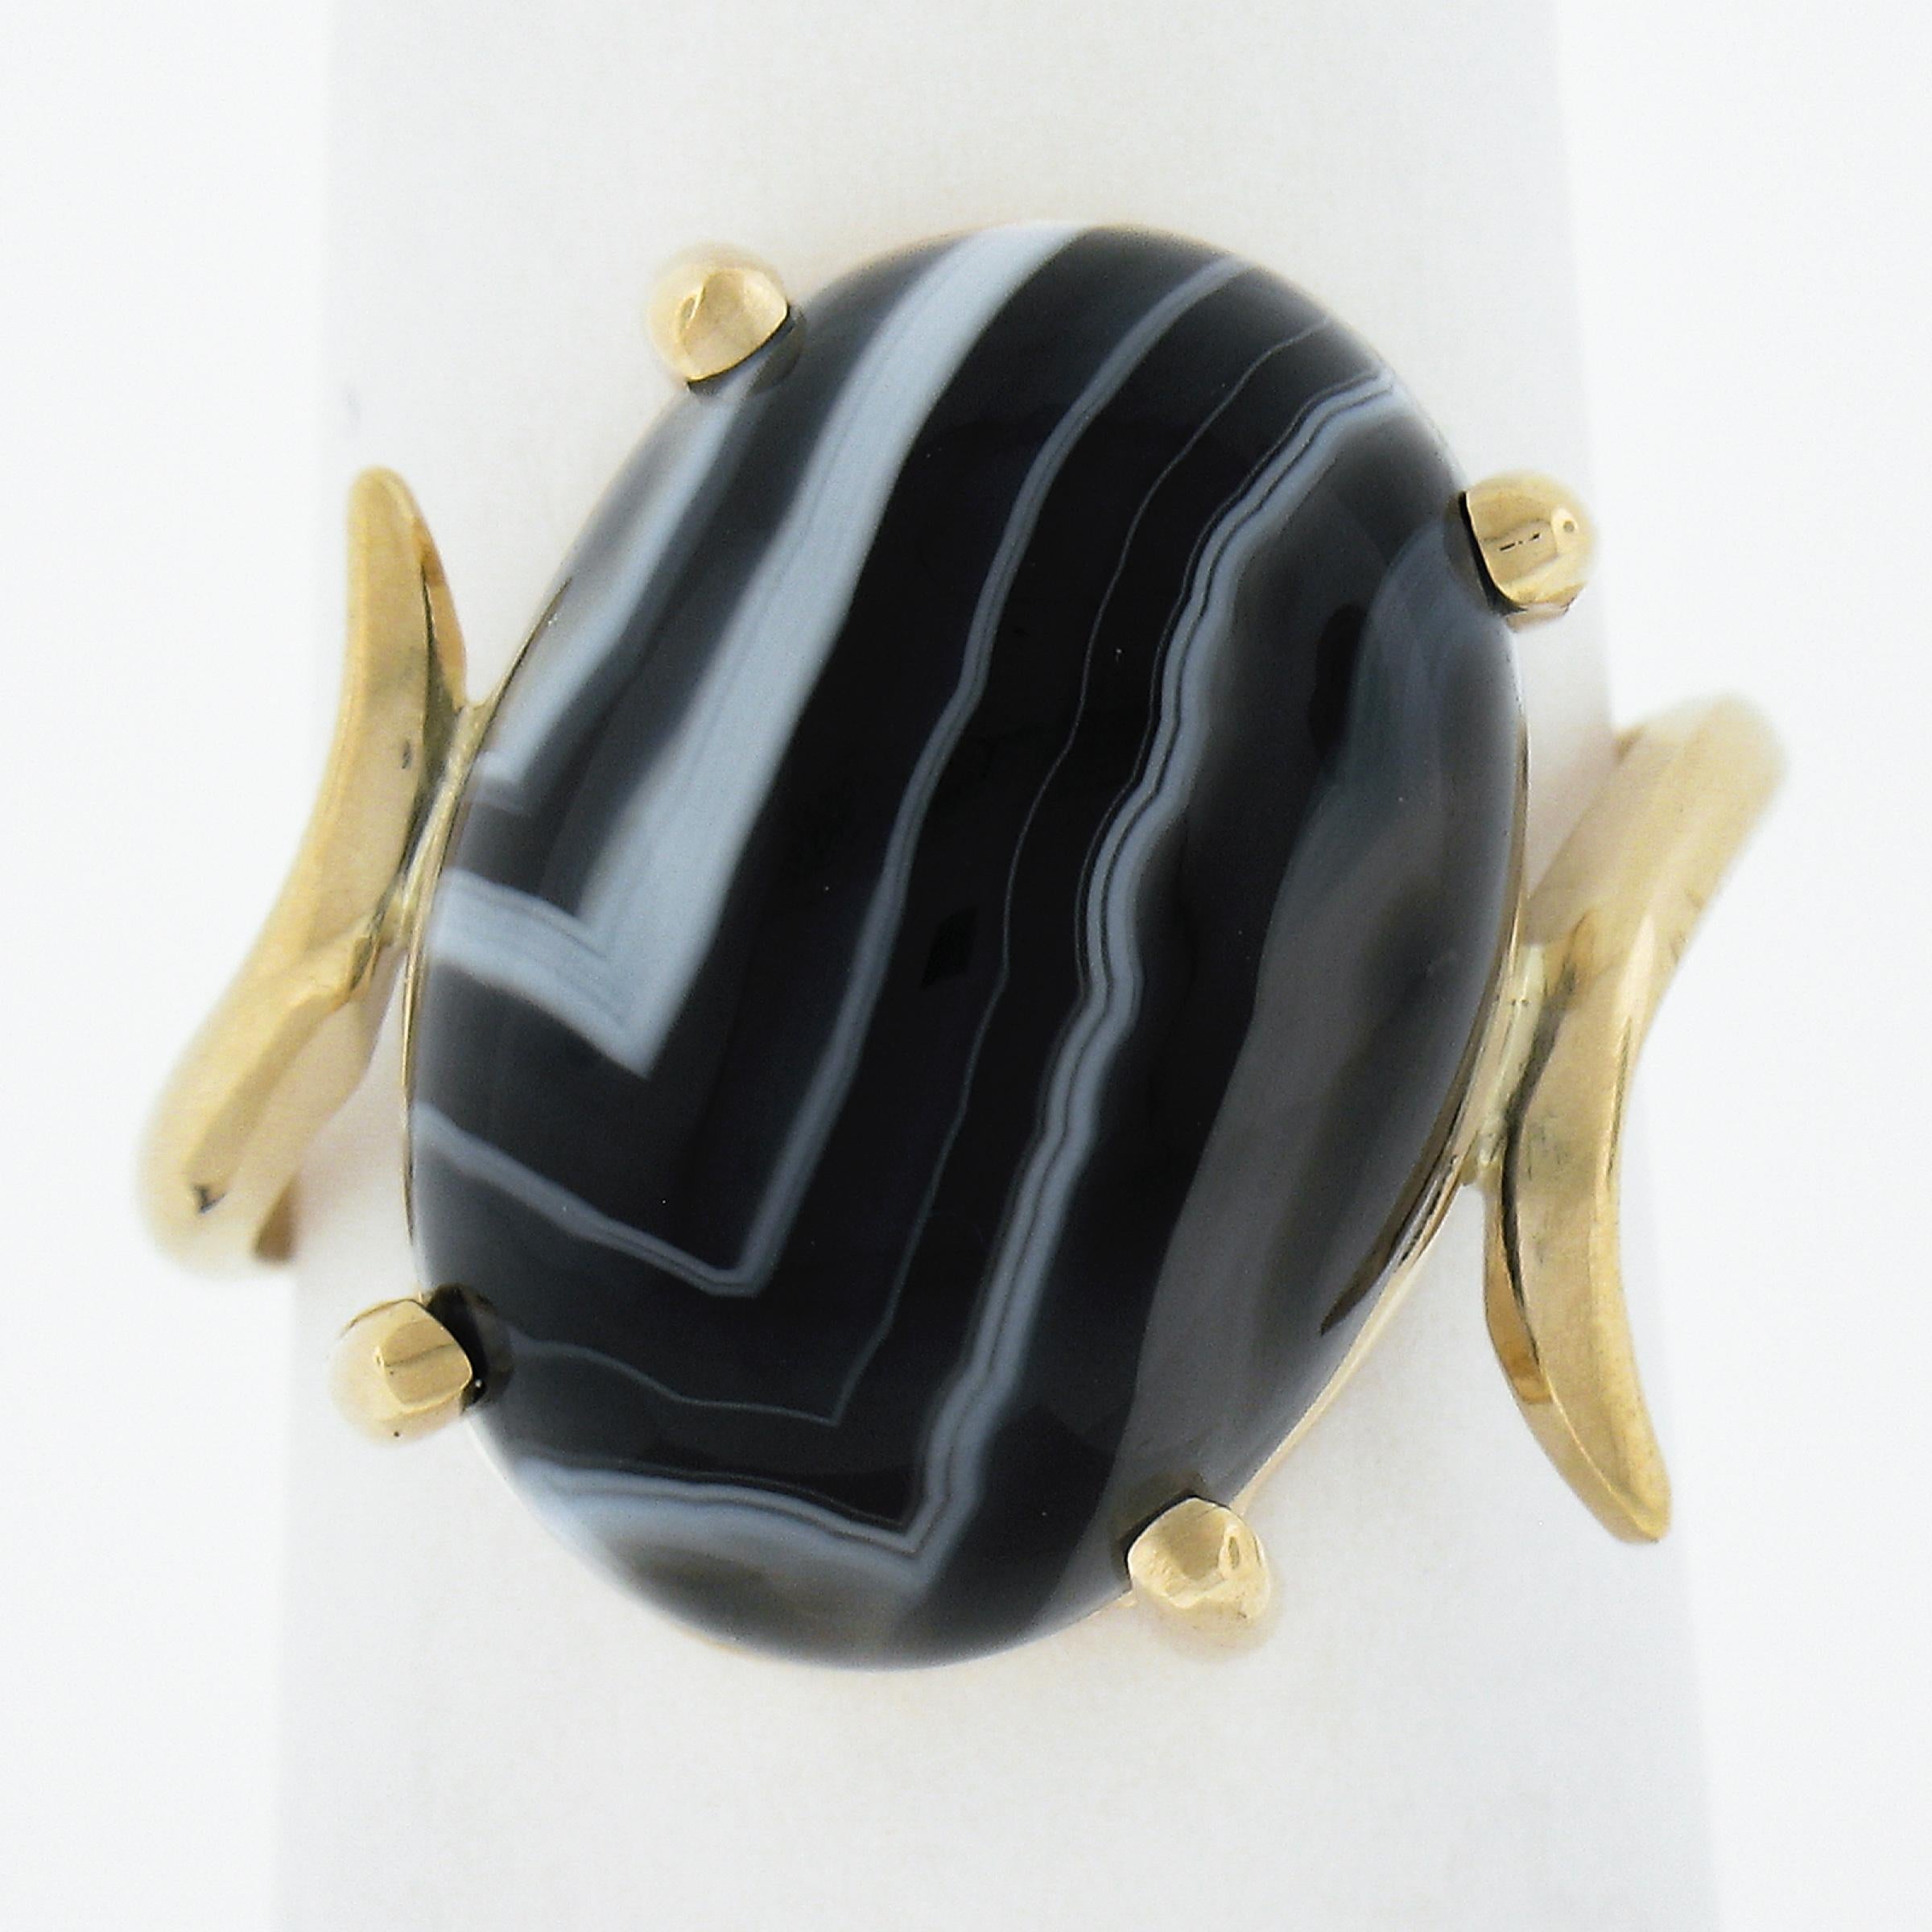 --Stone(s):--
(1) Natural Genuine Agate - Oval Cabochon Cut - Prong Set - Black Color with White banded Lines - 18.2x13mm (approx.)

Material: Solid 14K Yellow Gold
Weight: 5.52 Grams
Ring Size: 8.0 (Fitted on a finger. We can custom size this ring